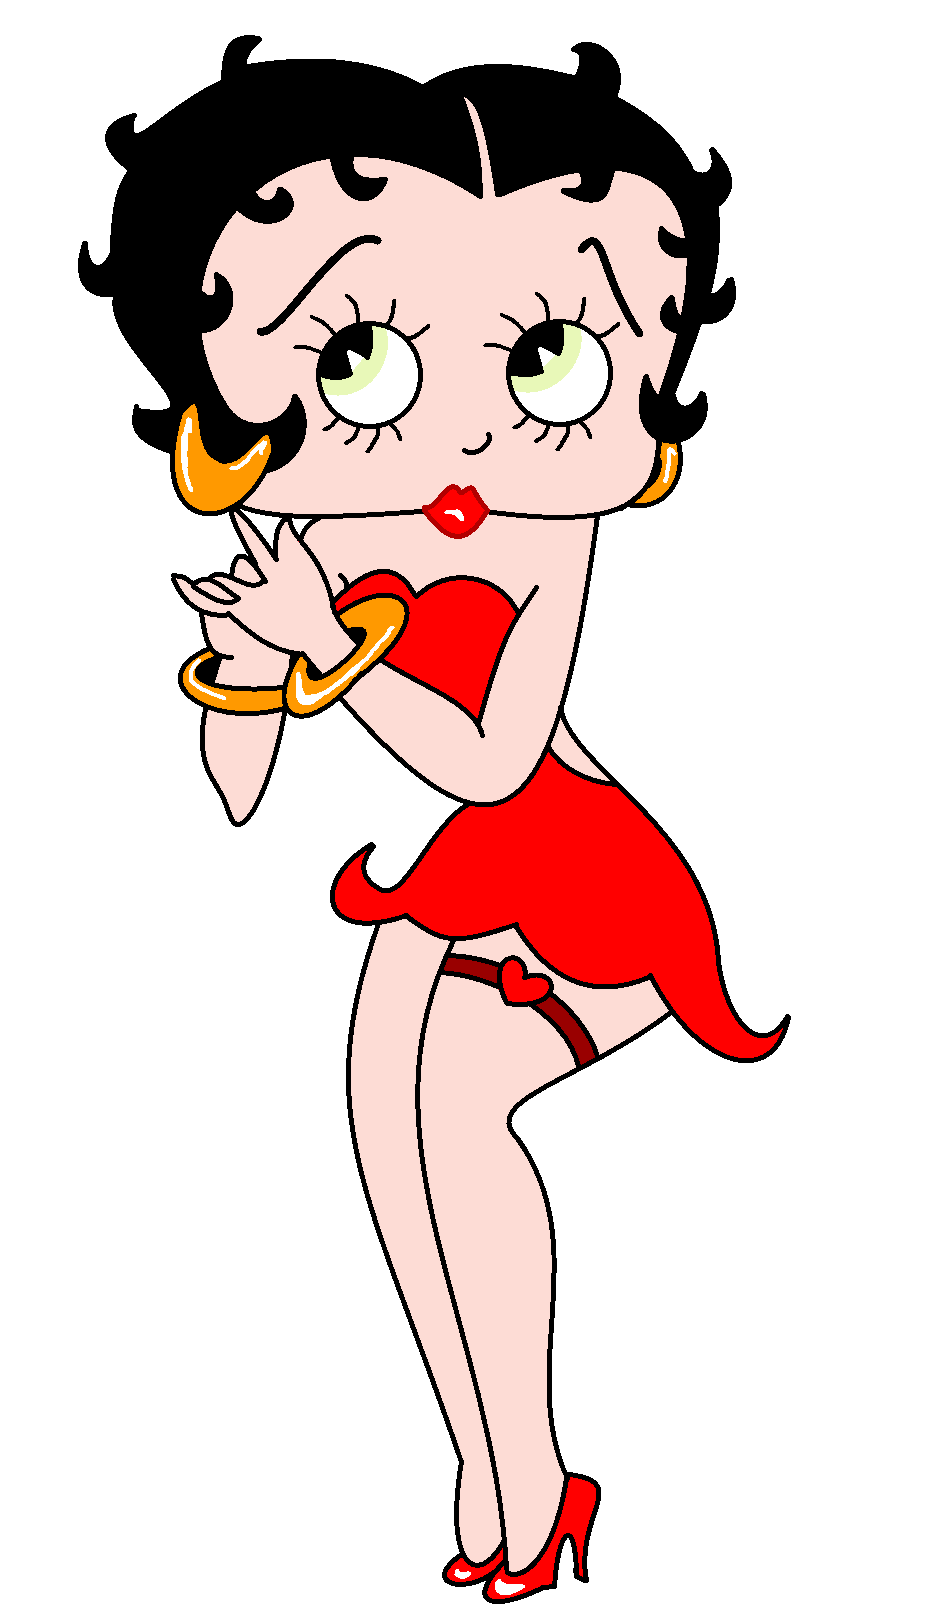 Betty Boop by Fortnermations on DeviantArt